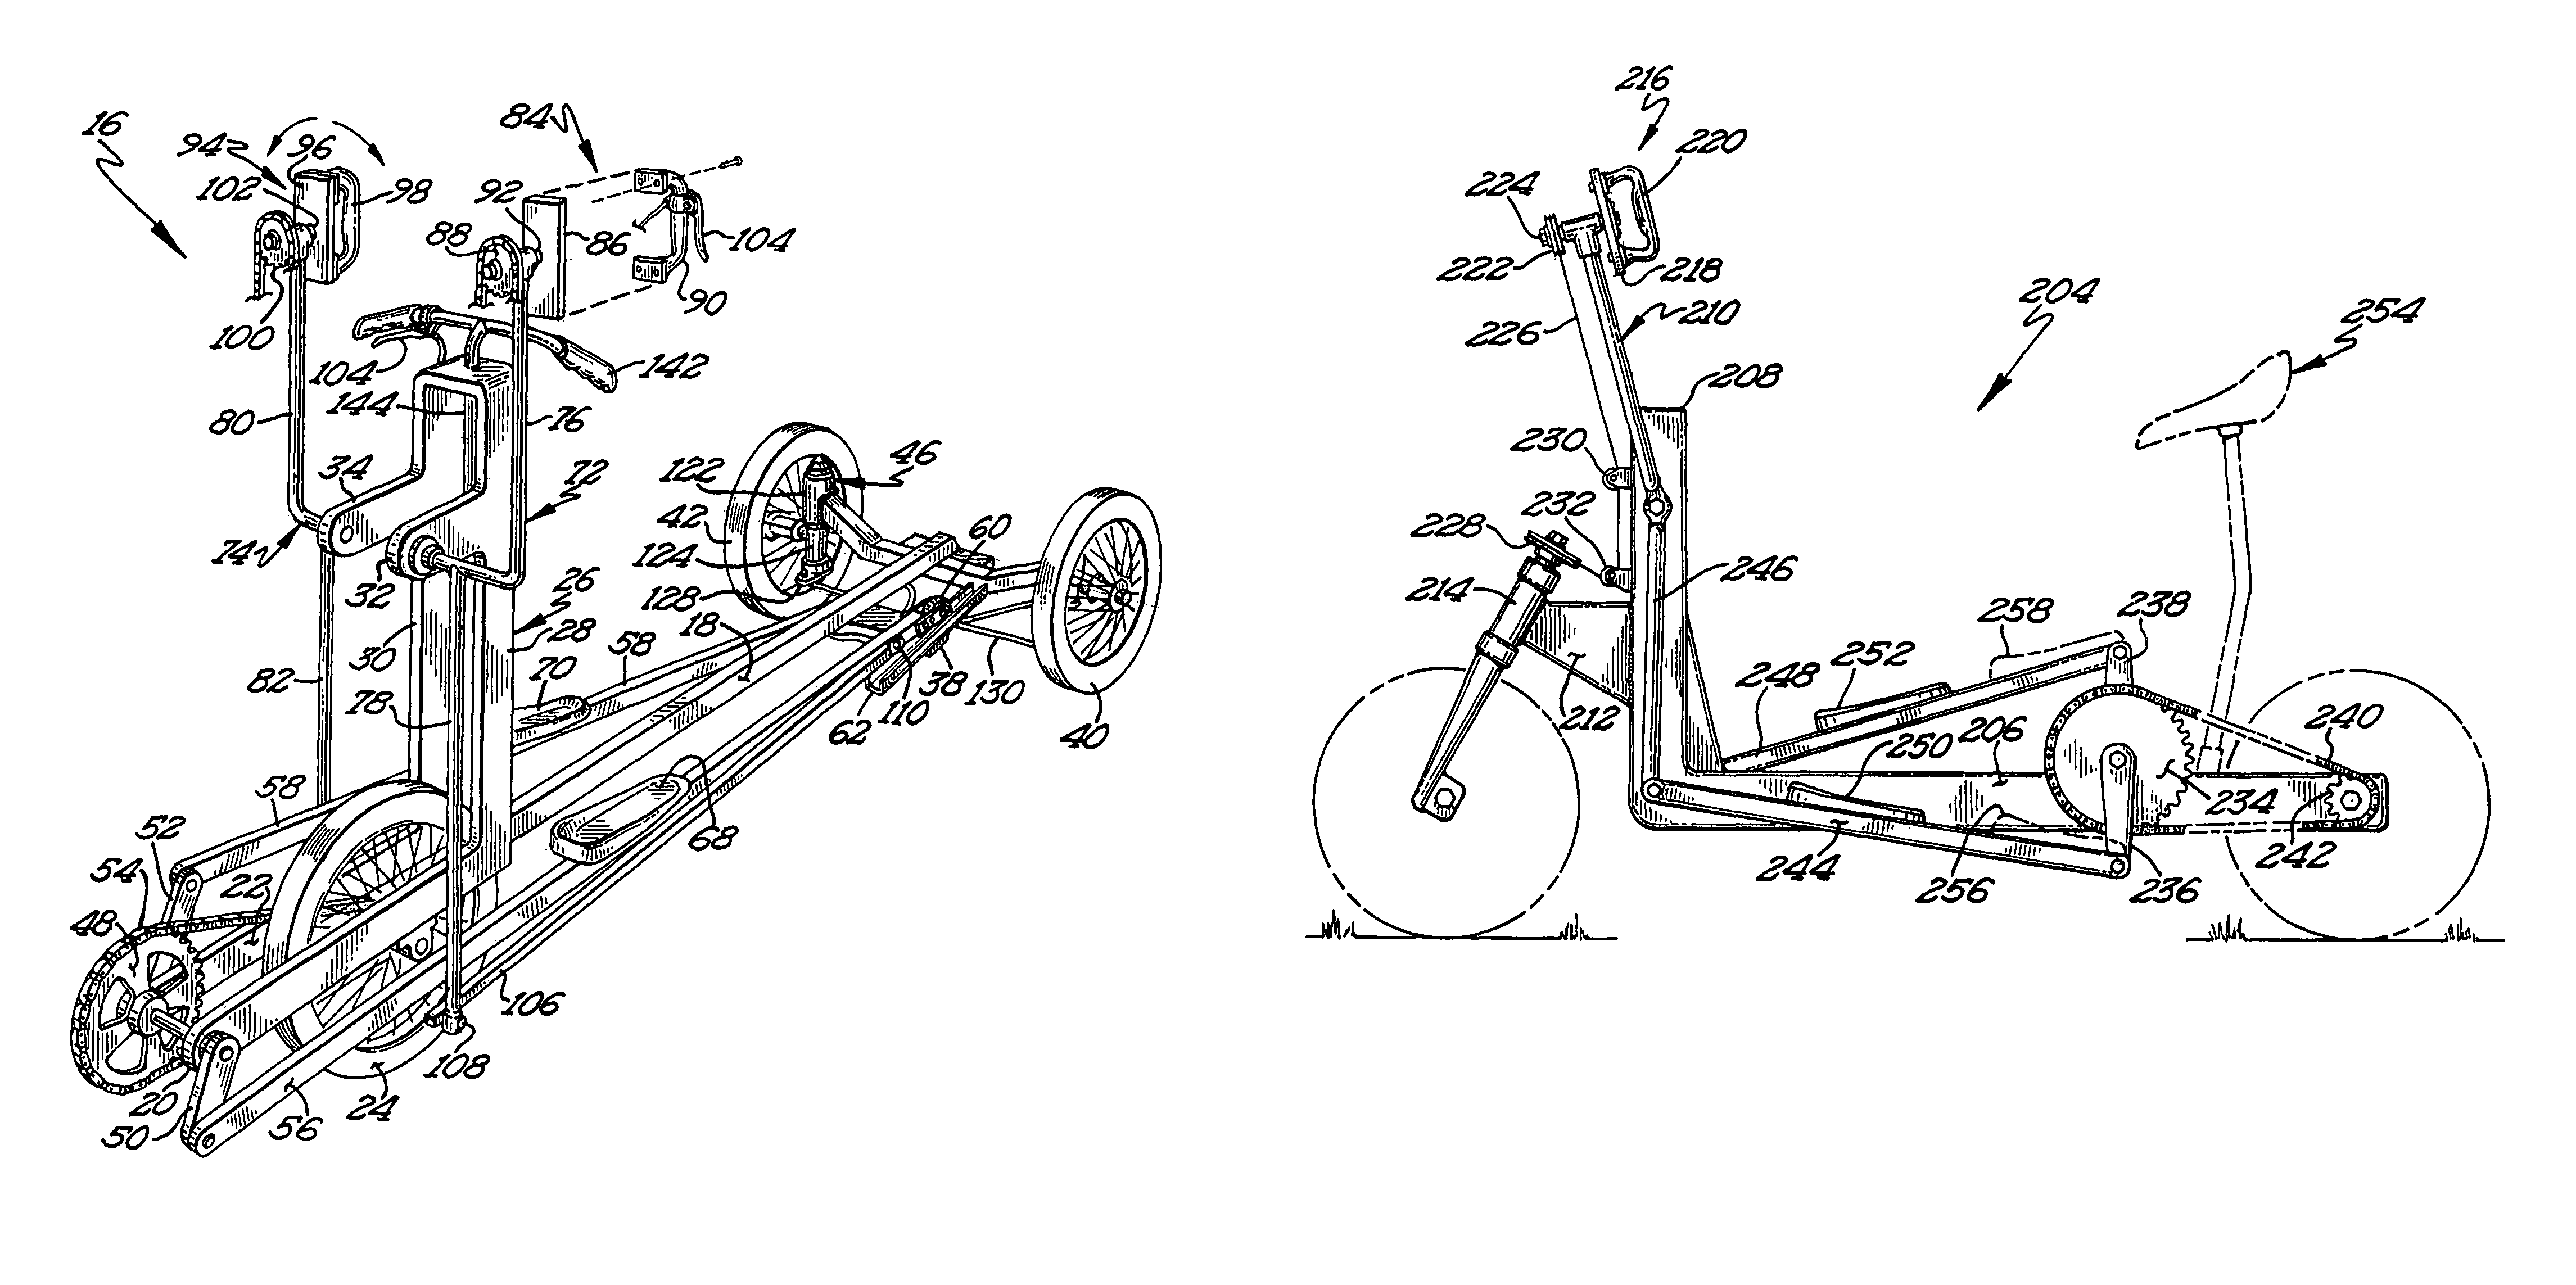 Recreational vehicle with elliptical drive